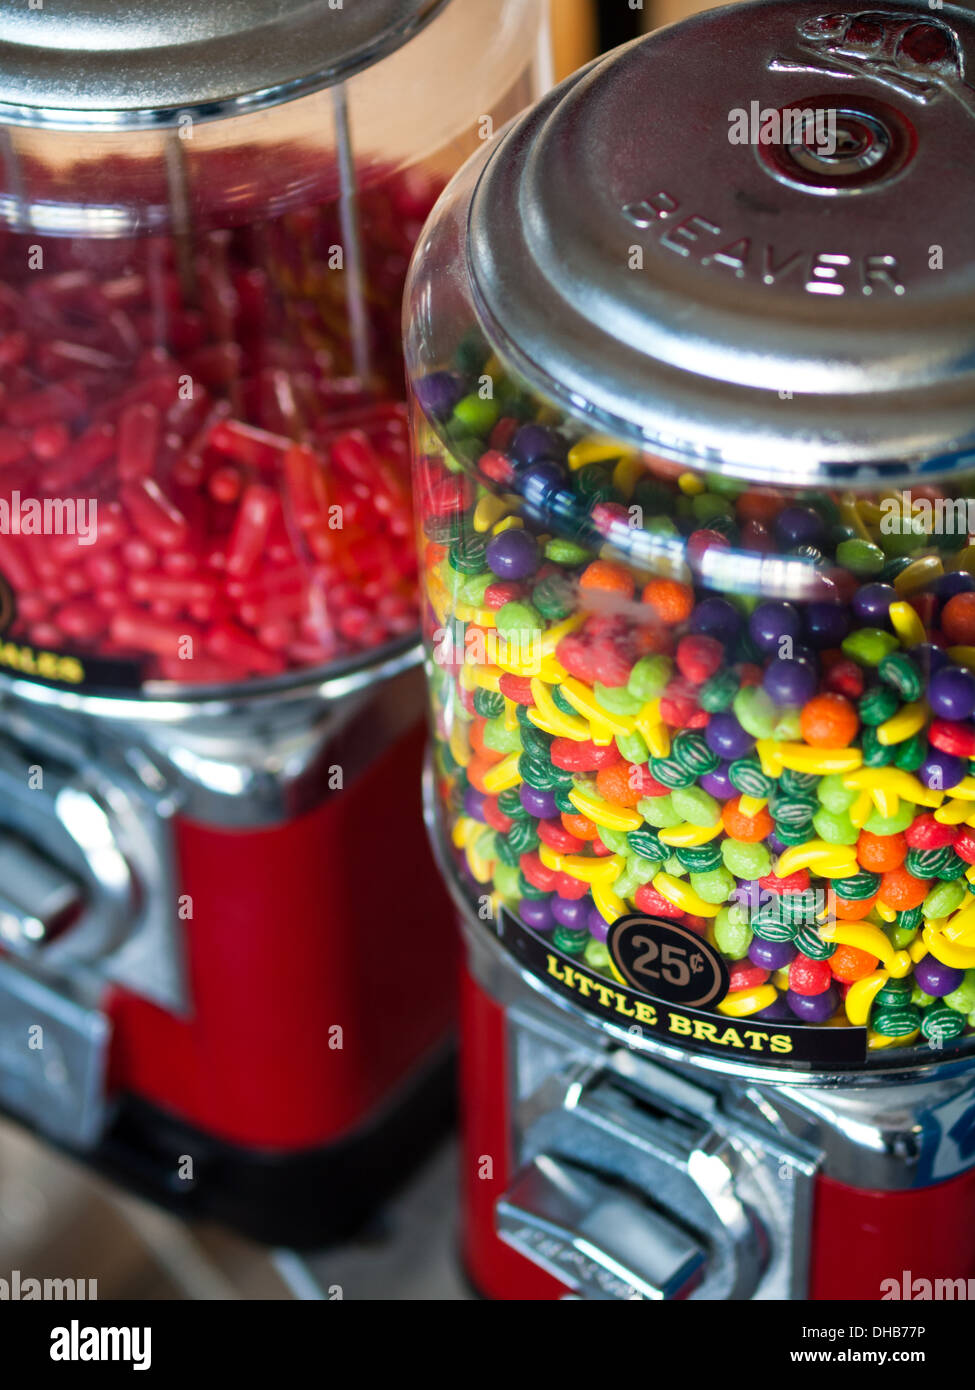 Little Brats and Hot Tamales candy in candy machines. Stock Photo